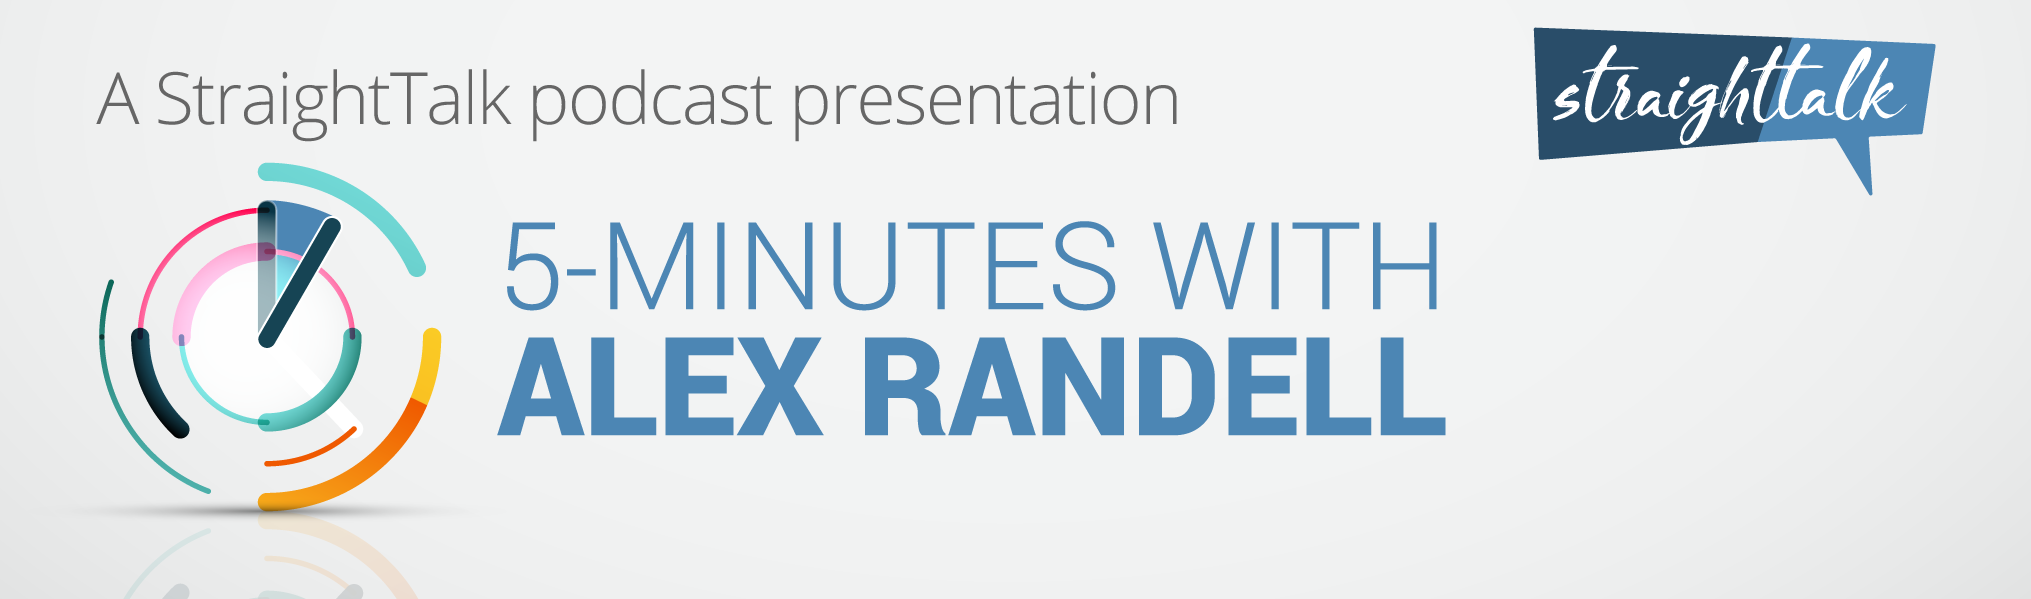 5-Minutes with Alex Randell